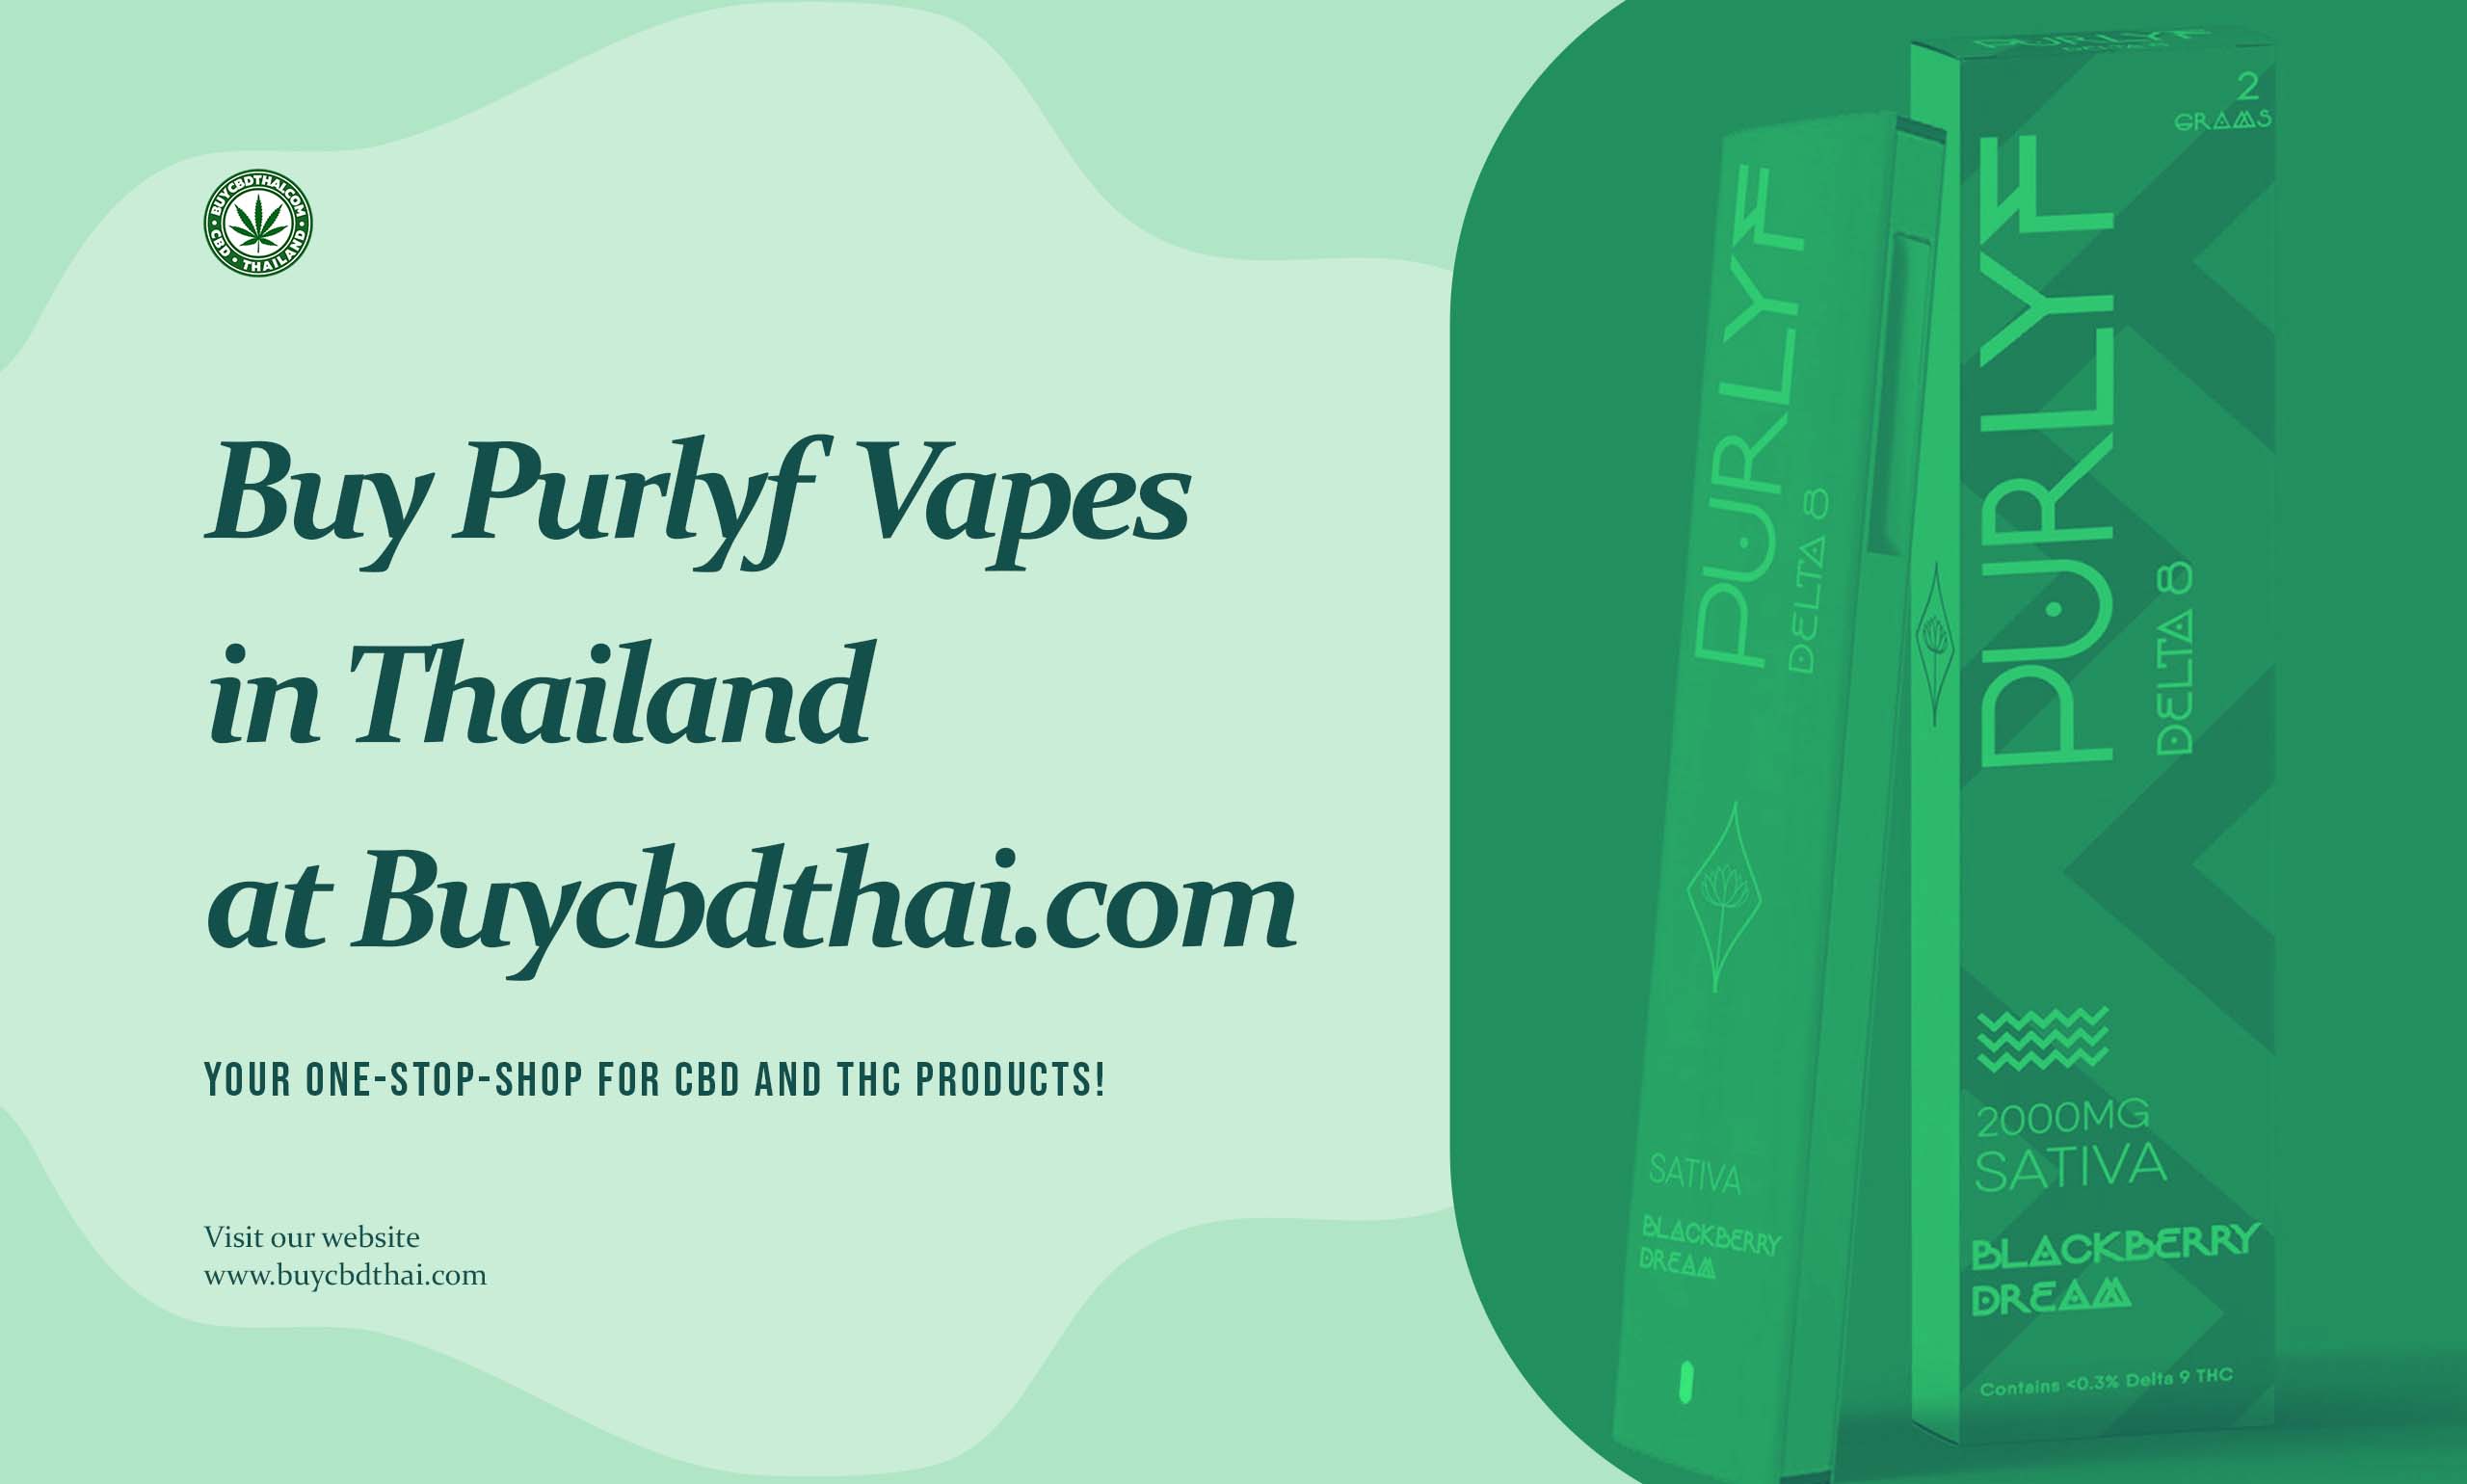 Buy Purlyf Vapes in Thailand at Buycbdthai